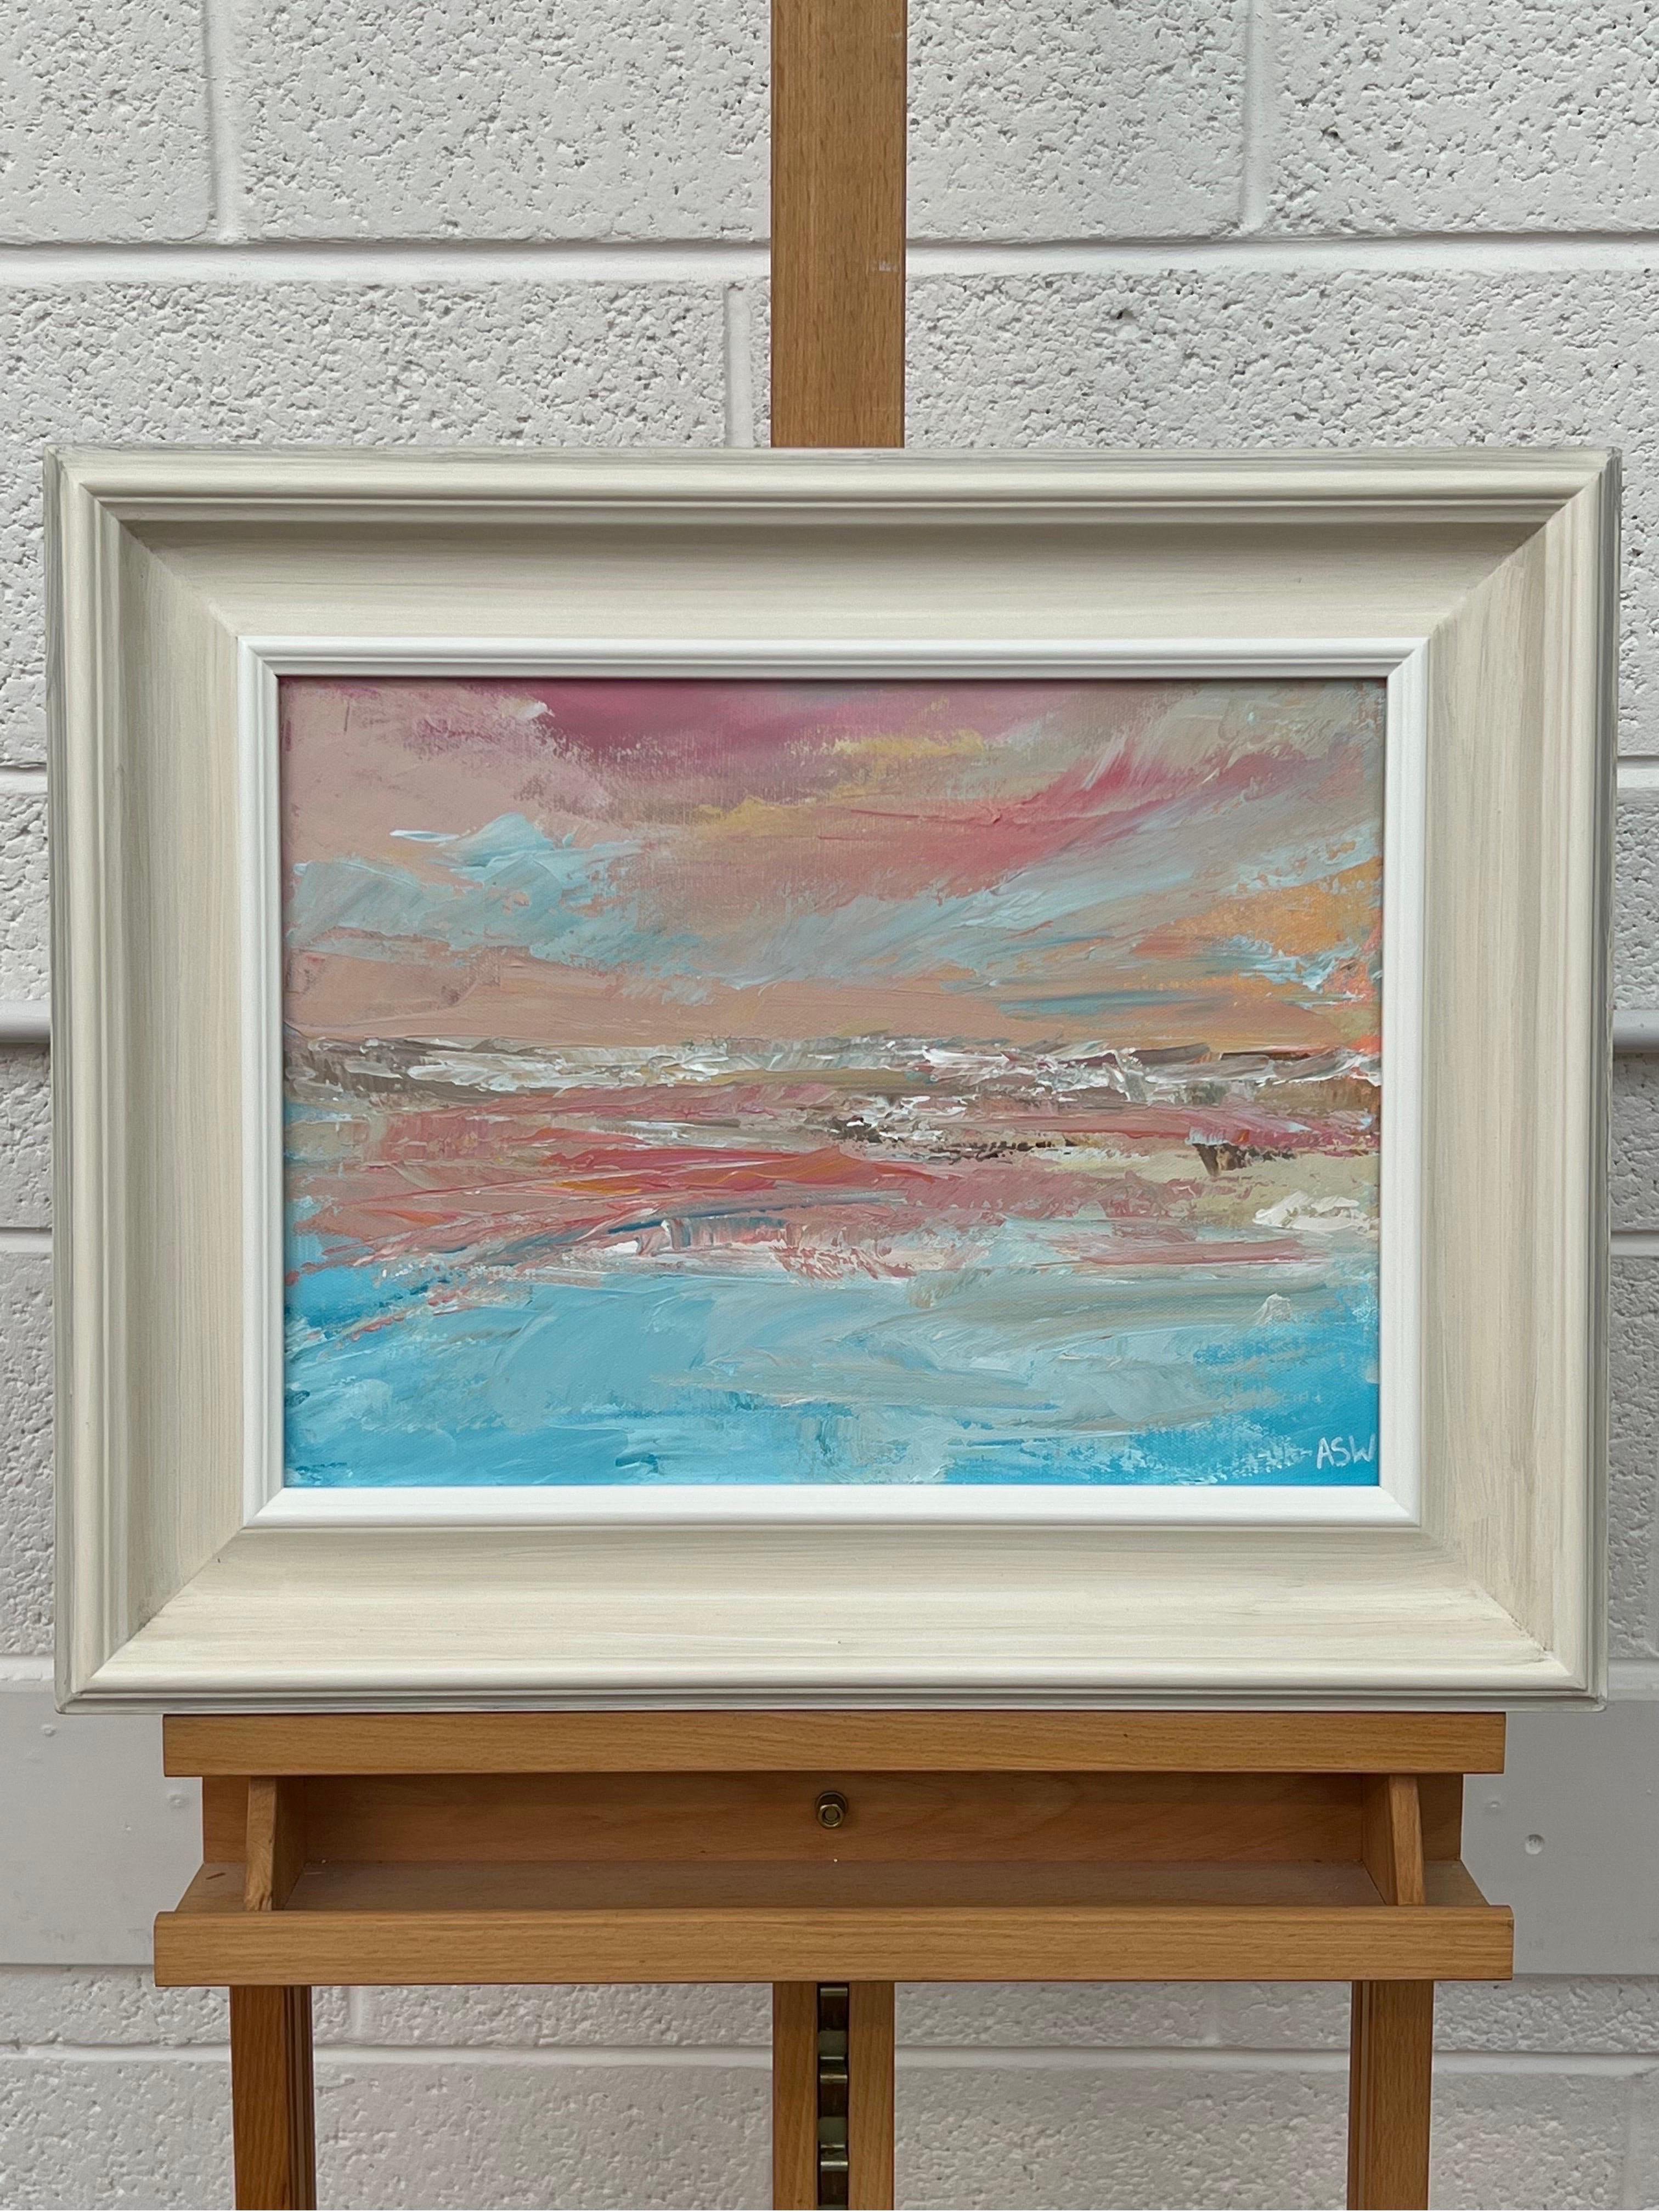 Abstract Impressionist Painting by Contemporary British Artist, Angela Wakefield. This atmospheric painting depicts an imagined scene using muted pink & blue pastel colours. This unique original forms part of a new body of work based on human